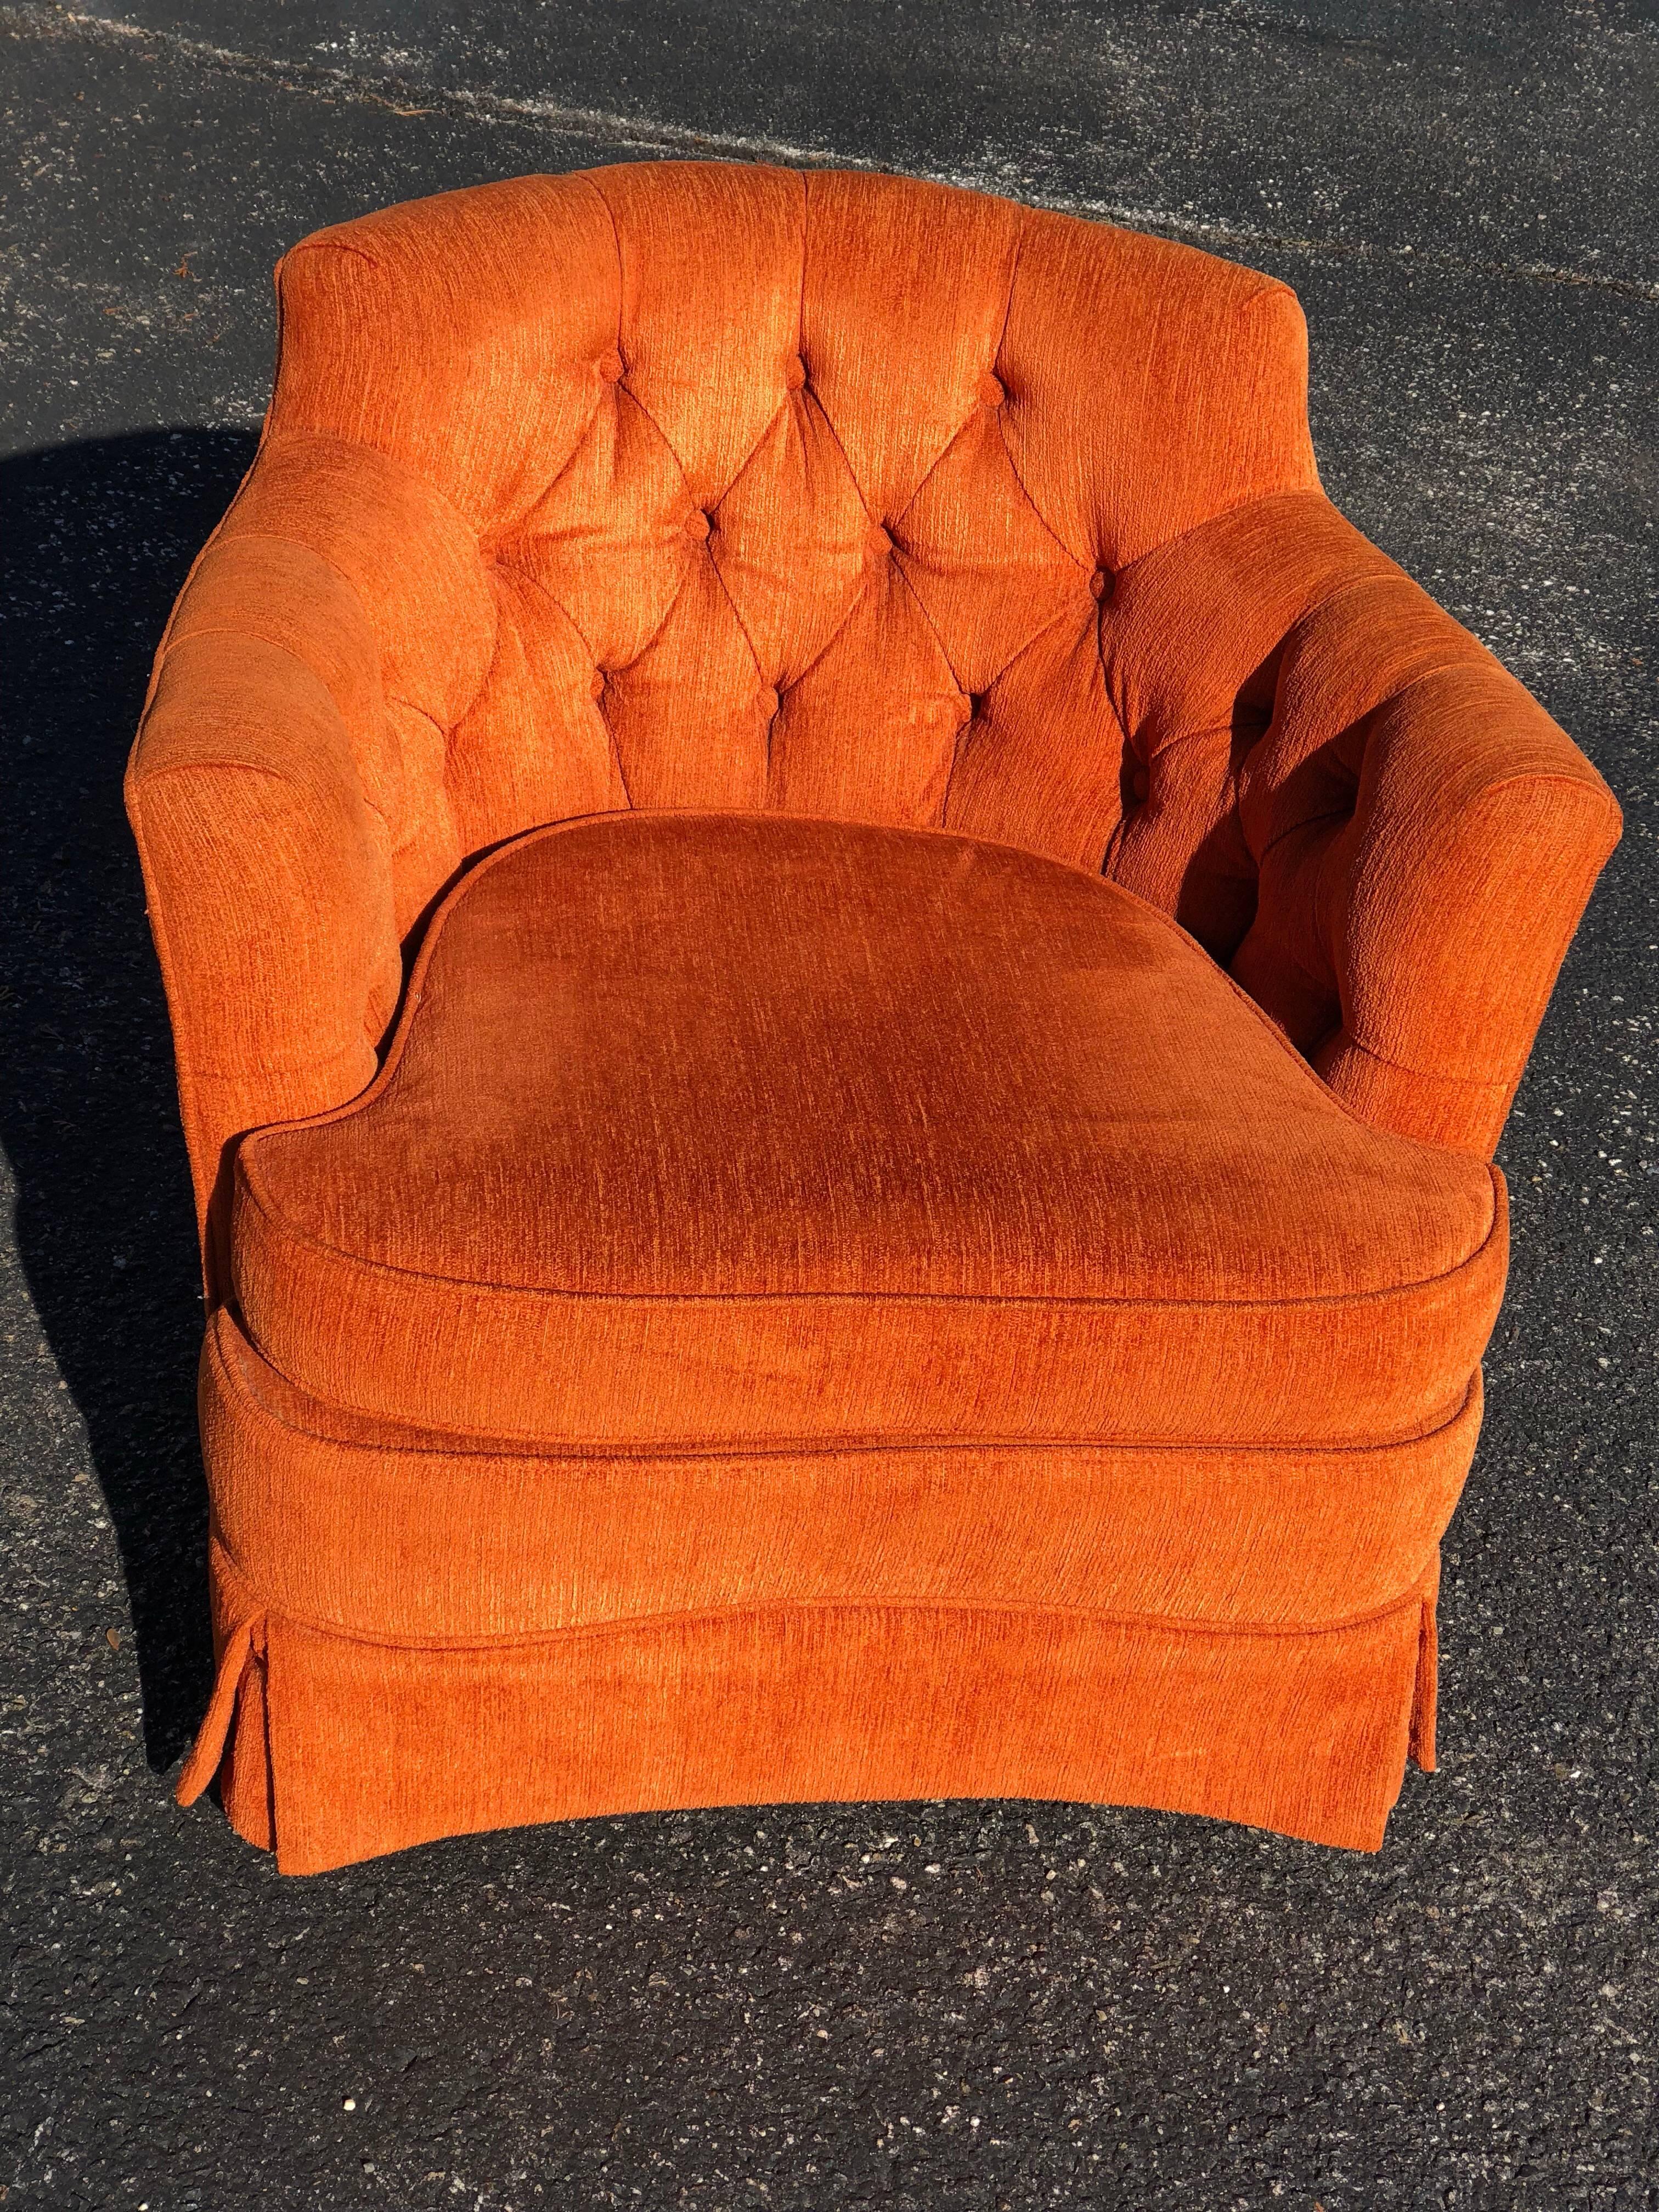 Hollywood Regency tufted orange club chair. On castors for easy movement. Excellent for a designer closet or dressing room, living room or bedroom. Or a nice accent piece to a child's bedroom.
Woodmark company had unparalleled integrity,